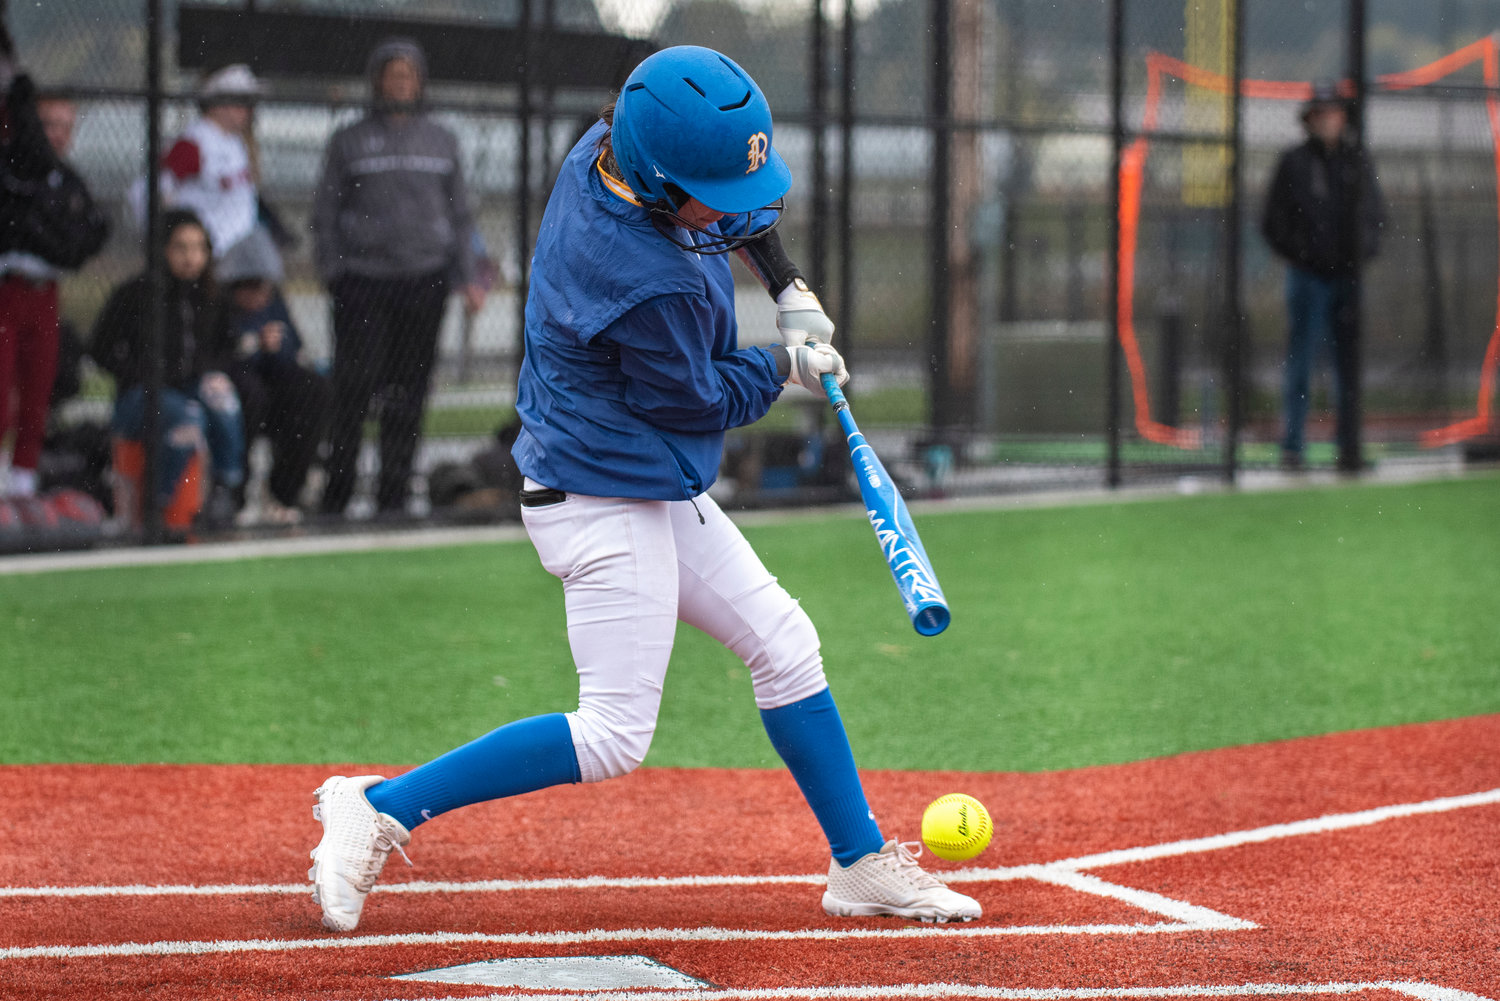 Rochester's Macey Fluetsch connects on a pitch during a road game against W.F. West on Wednesday, April 13.